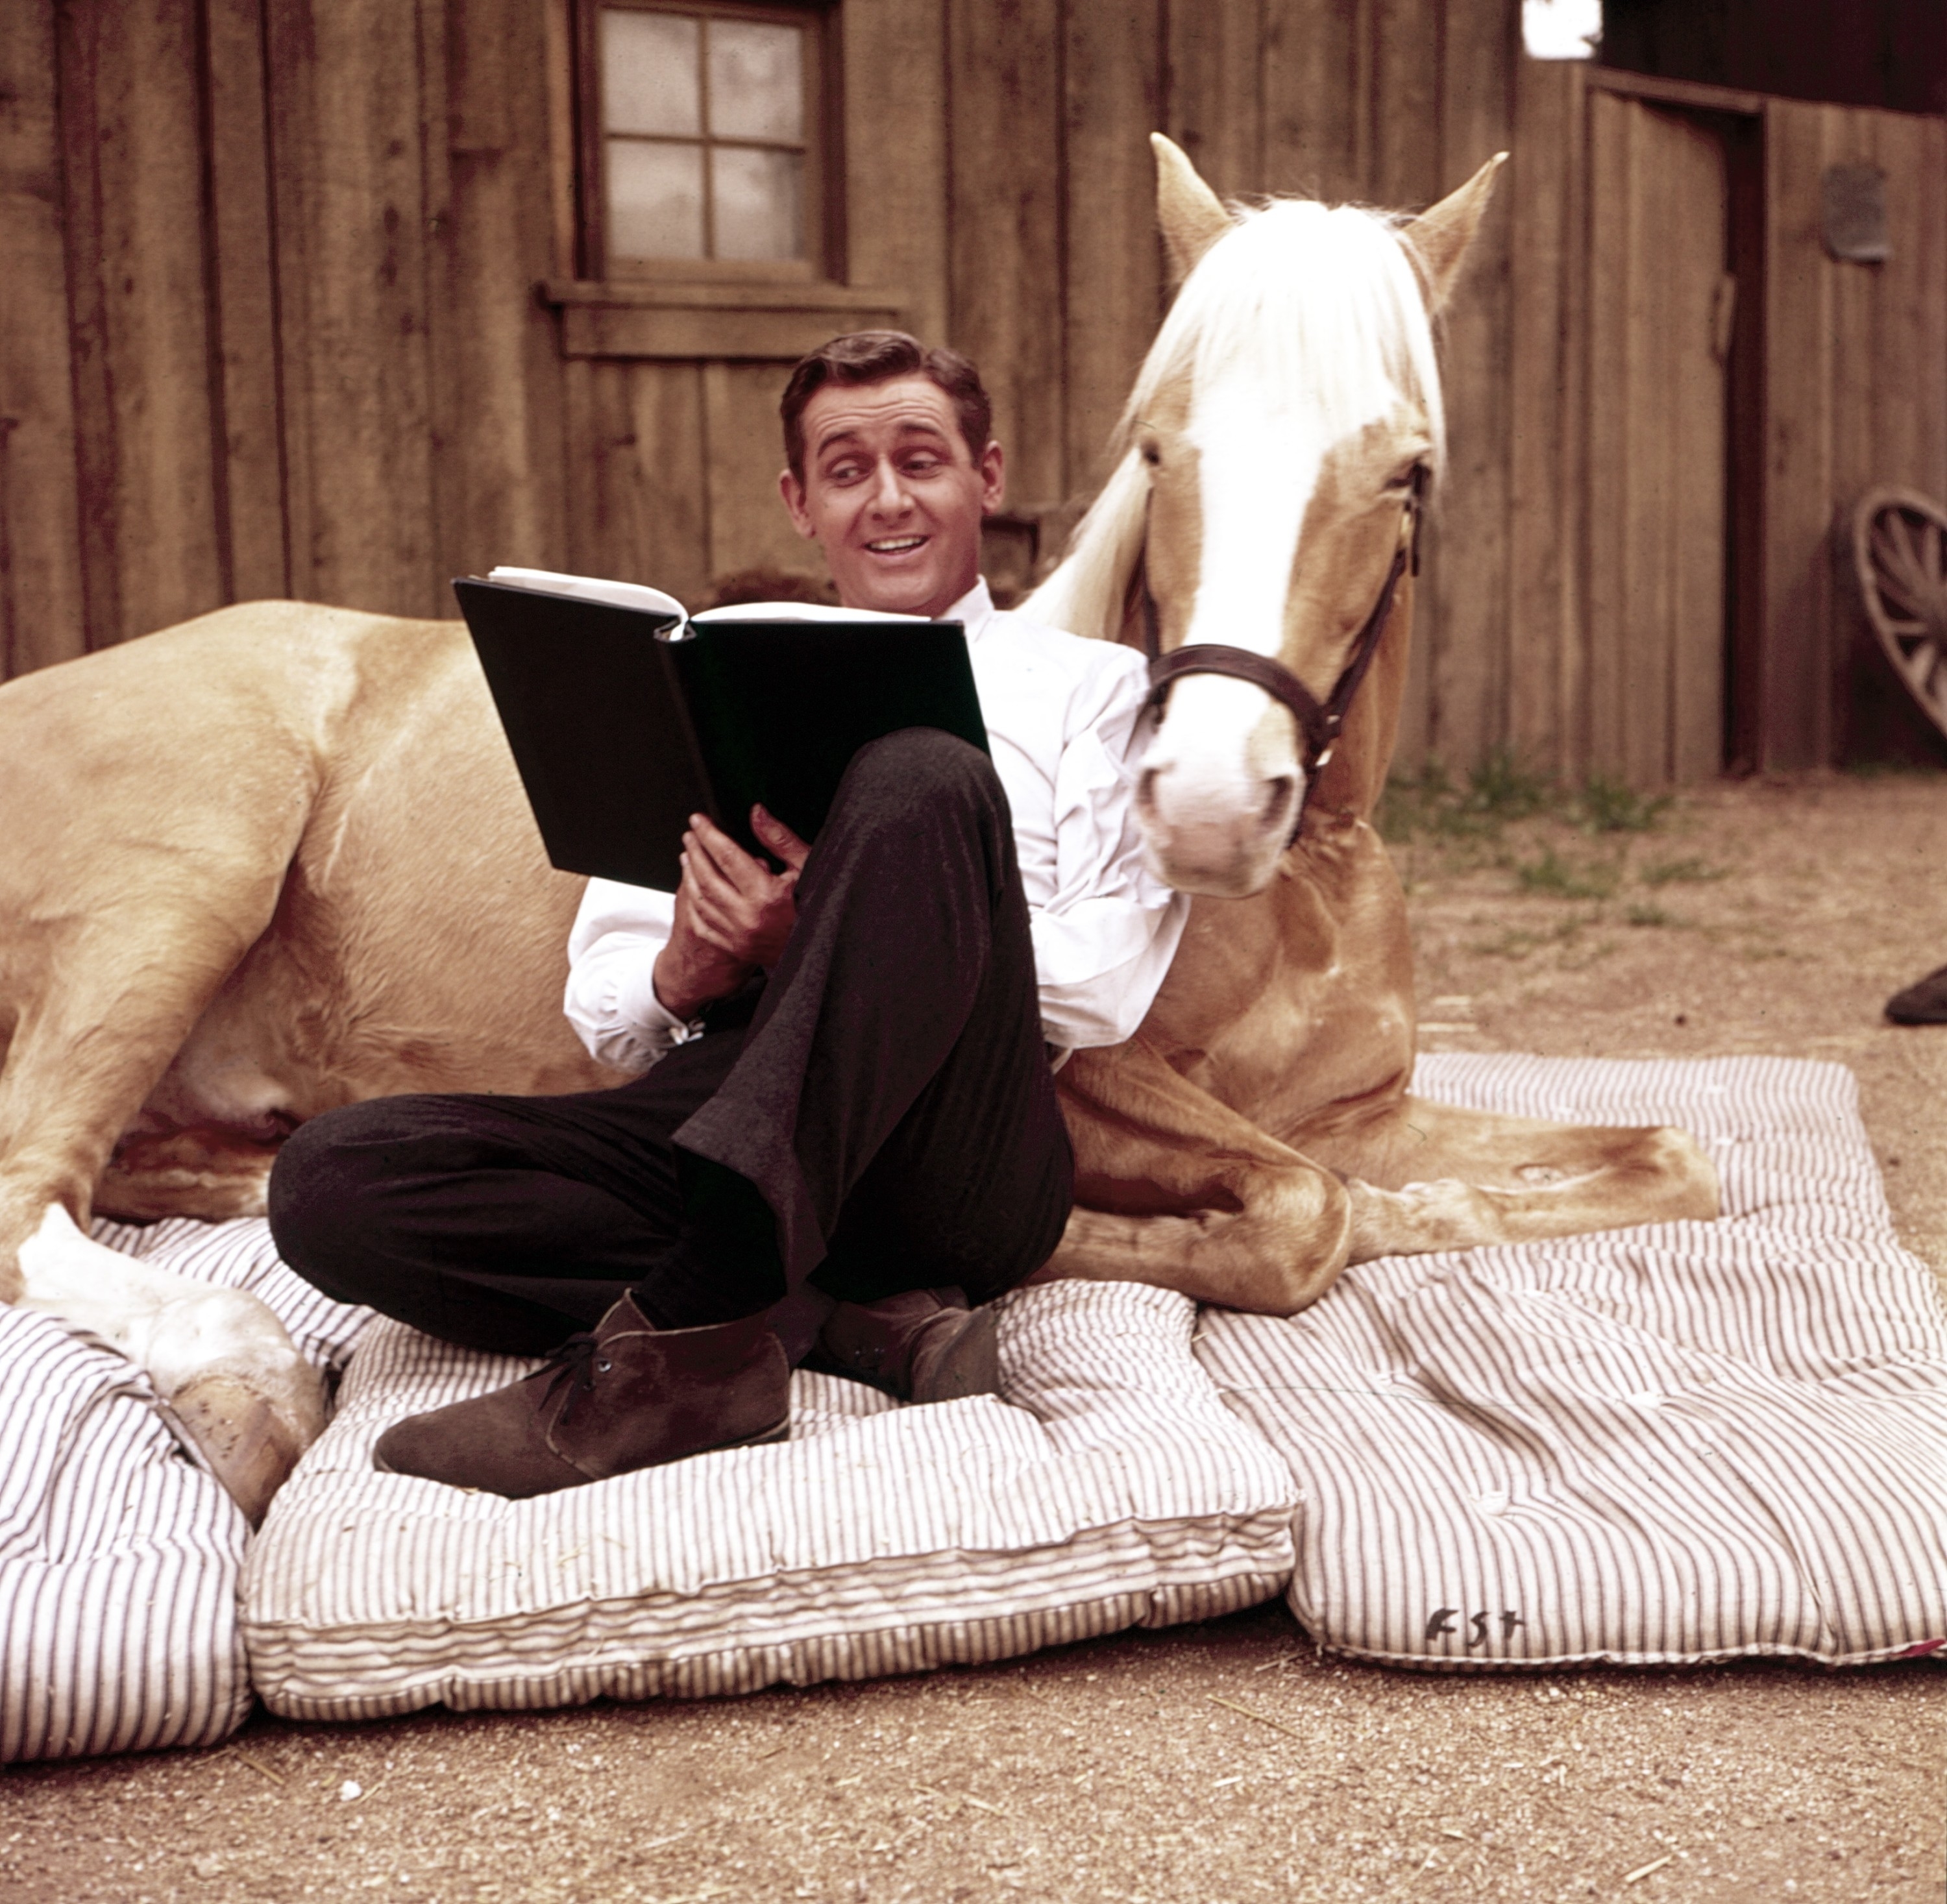 MISTER ED the horse, from the TV show Mister Ed, and Wilbur, his human, on the set of Mister Ed